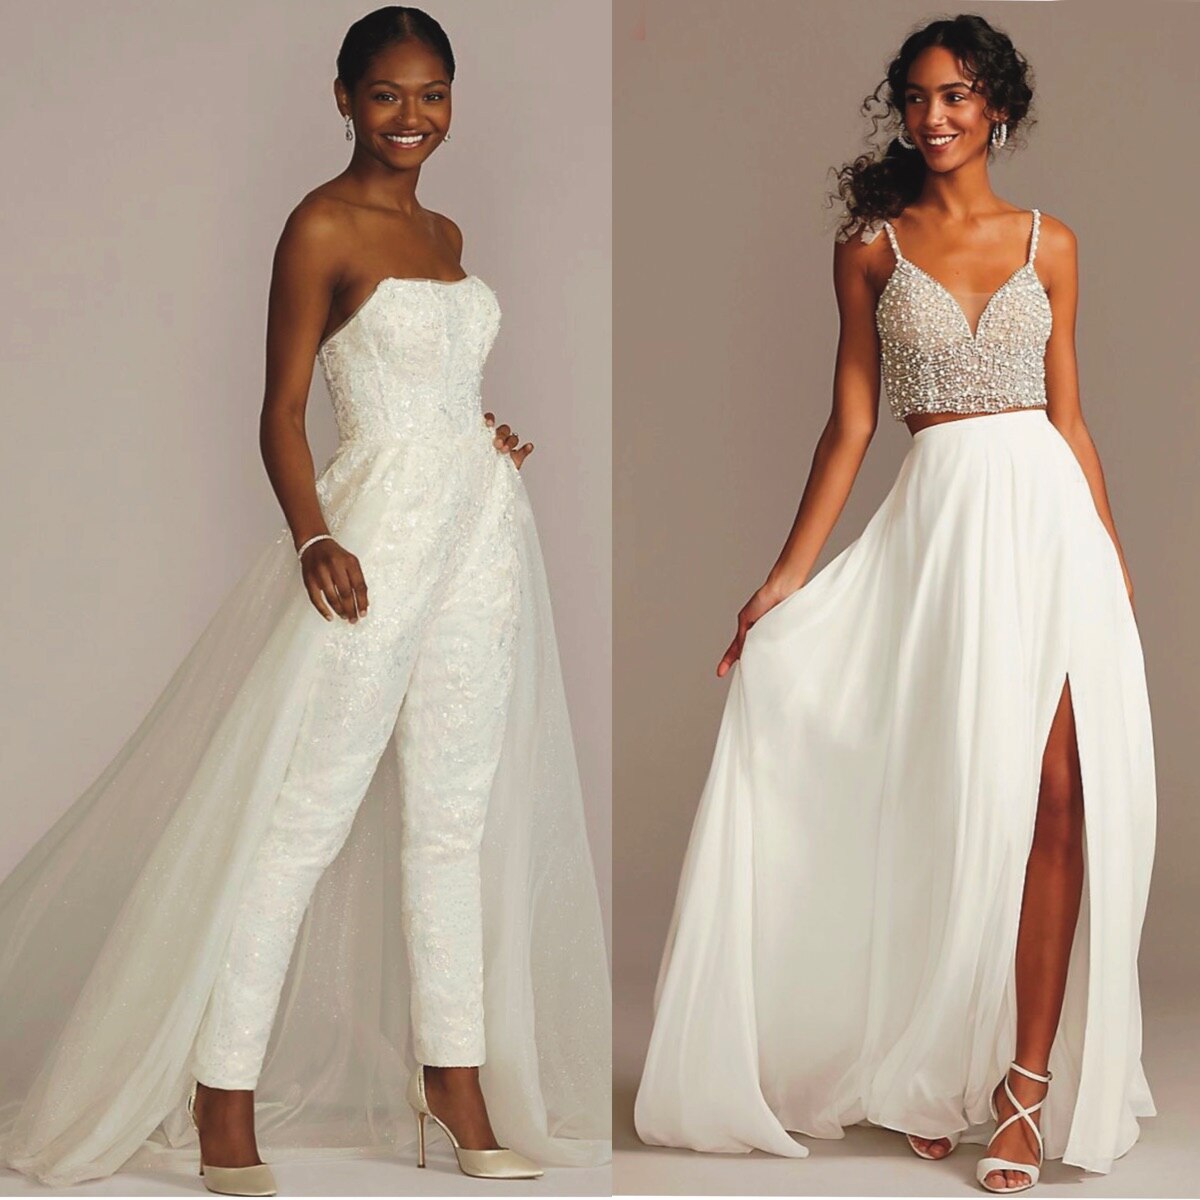 Morilee by Madeline Gardner Fall 2019 Wedding Dress Collection